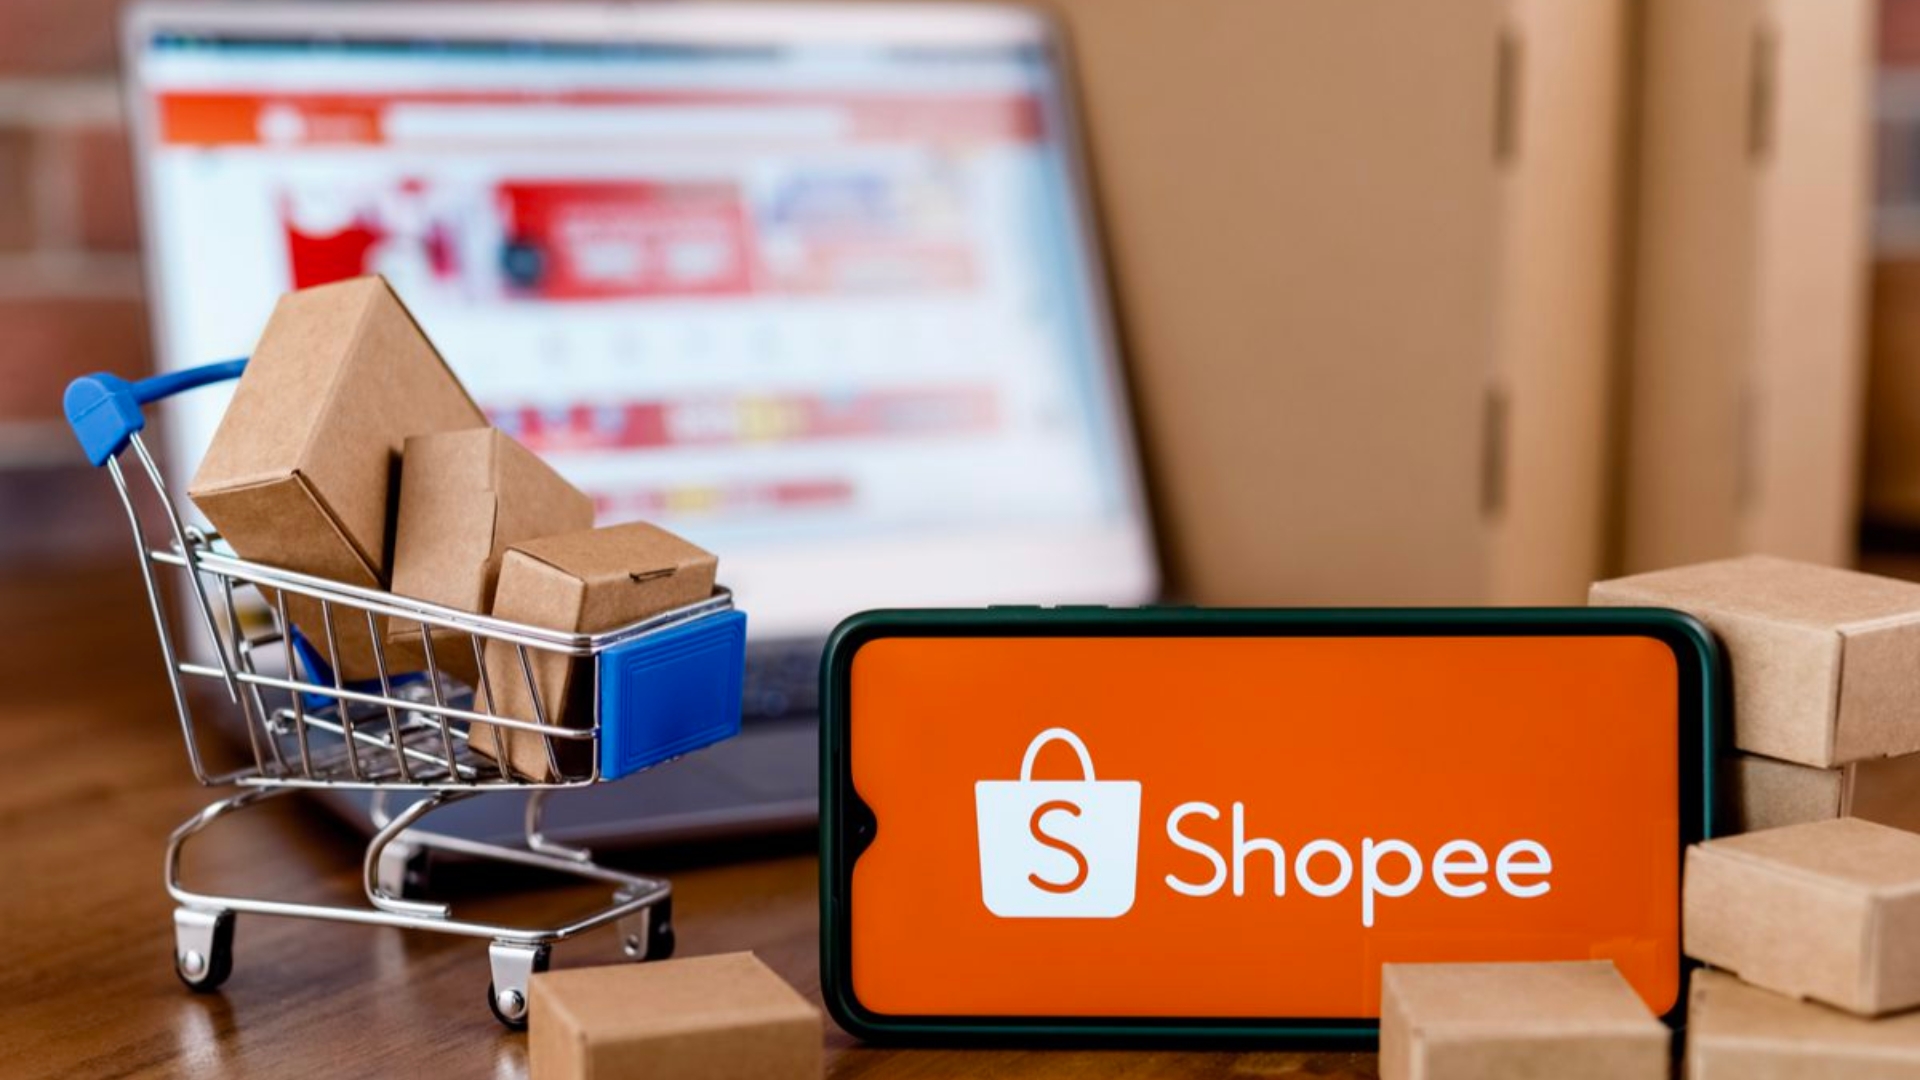 mobile phone showing shopee optimization advertising with shop trolley miniature and cardboard box inside it on the left side and laptop shows shopee website as a background